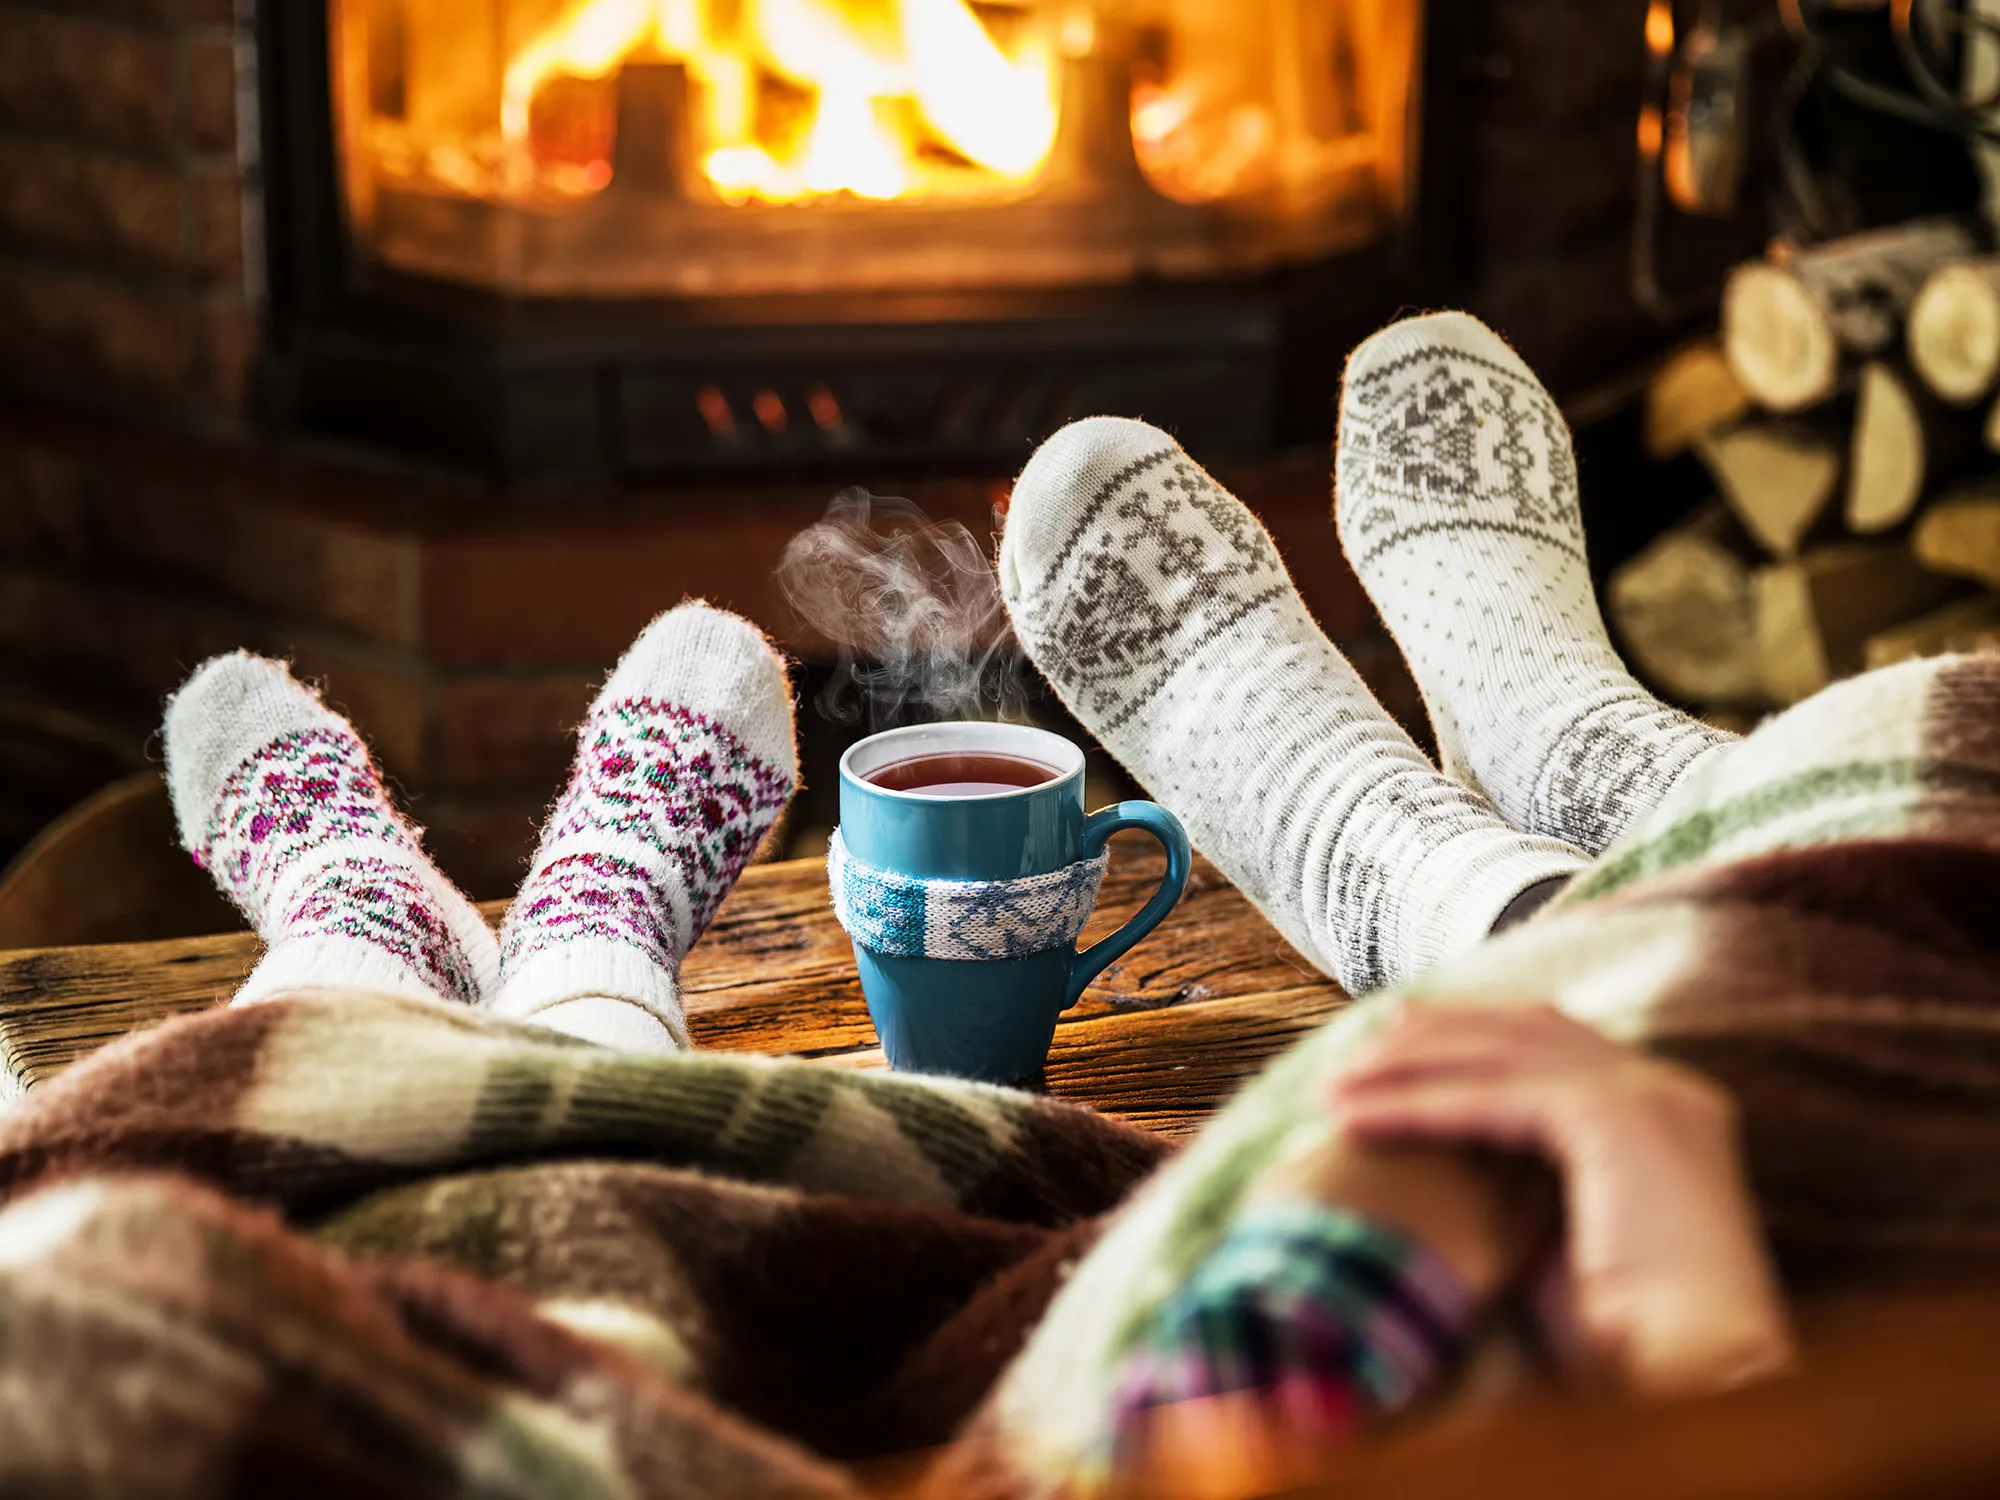 Hygge: Embracing Coziness and Well-Being